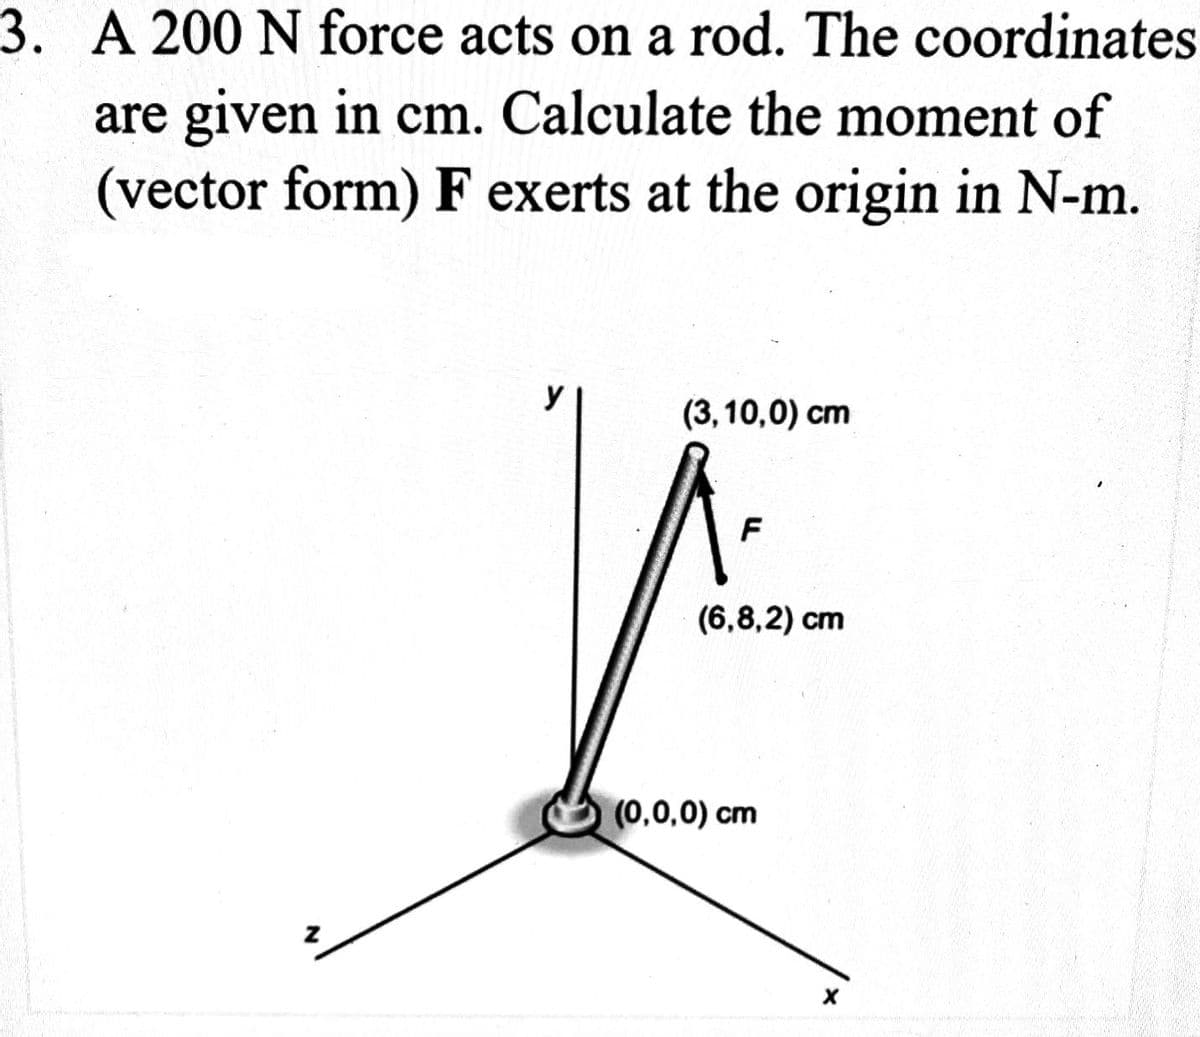 3. A 200 N force acts on a rod. The coordinates
are given in cm. Calculate the moment of
(vector form) F exerts at the origin in N-m.
(3,10,0) cm
F
(6,8,2) cm
(0,0,0) cm